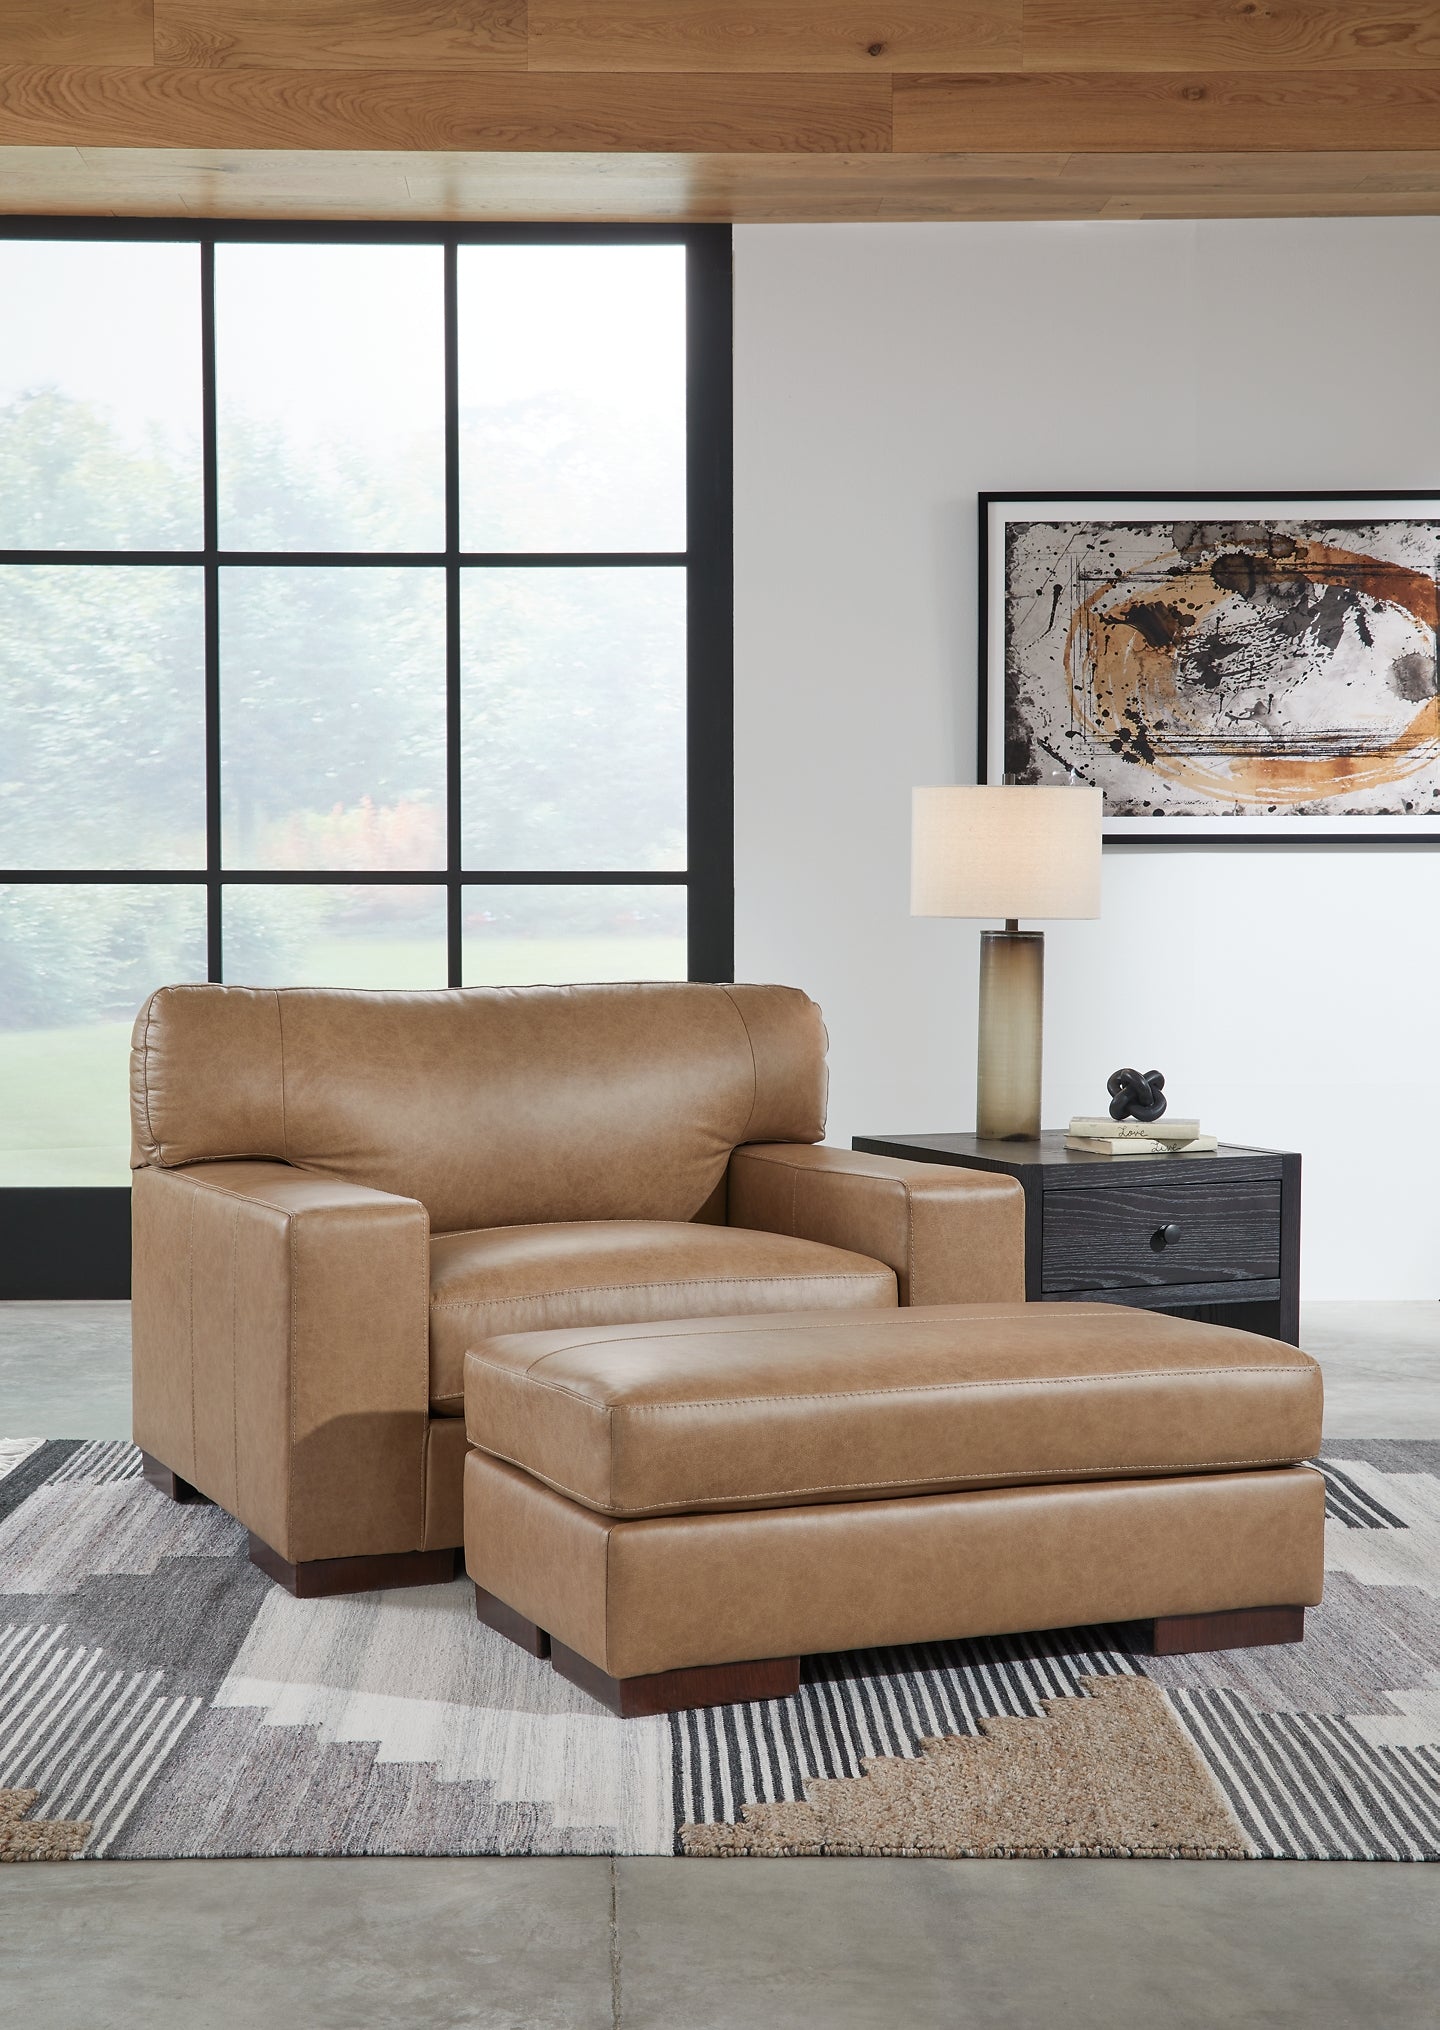 Lombardia Chair and Ottoman JB's Furniture  Home Furniture, Home Decor, Furniture Store